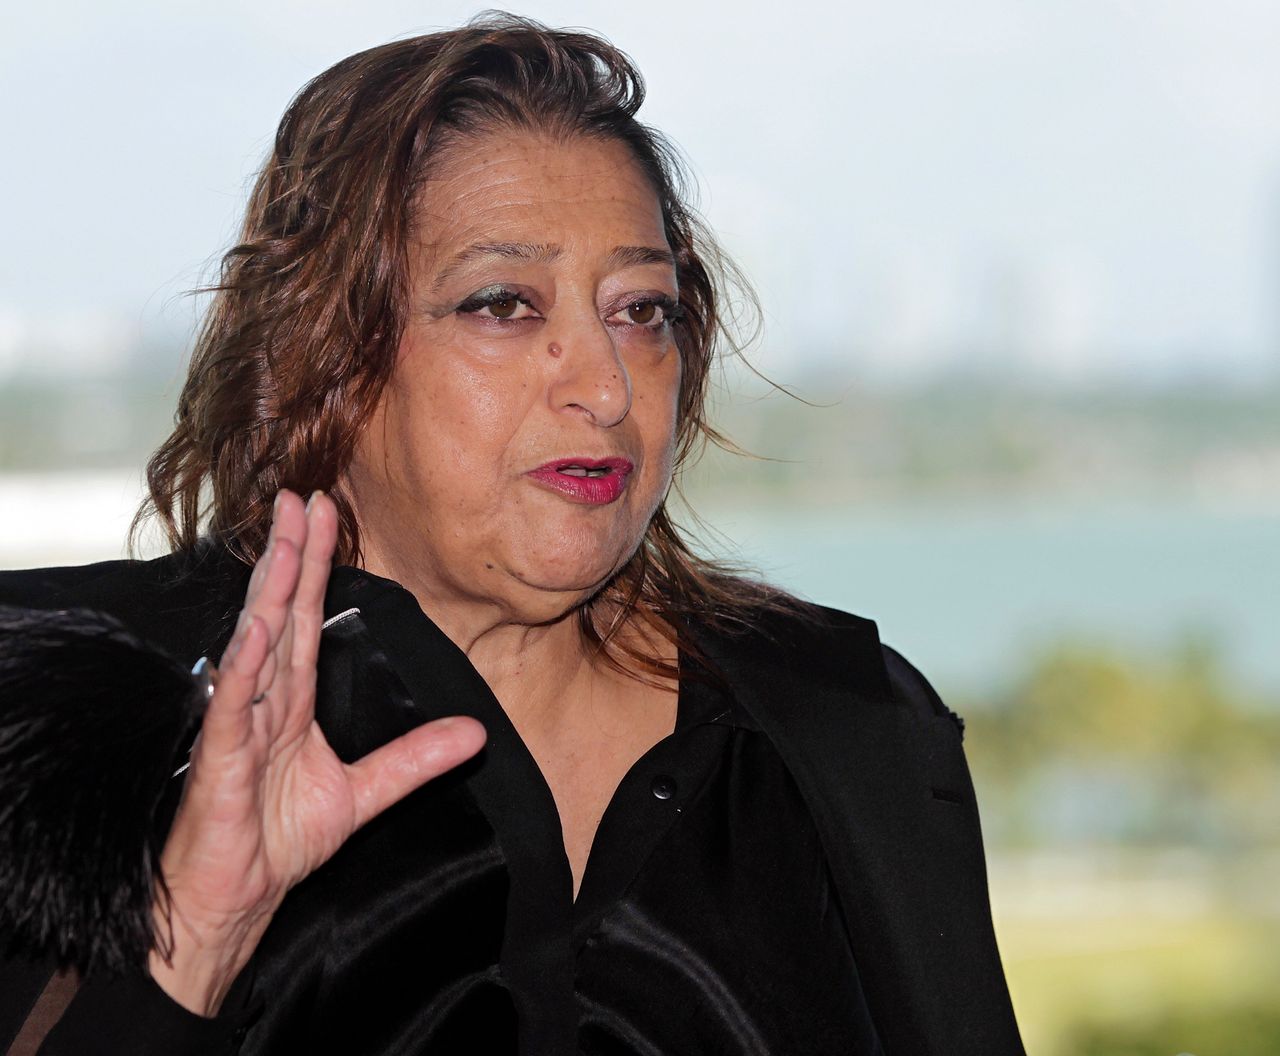 Renowned international architect Zaha Hadid speaks to the media after a ground-breaking ceremony for her residential tower in Miami December 5, 2014